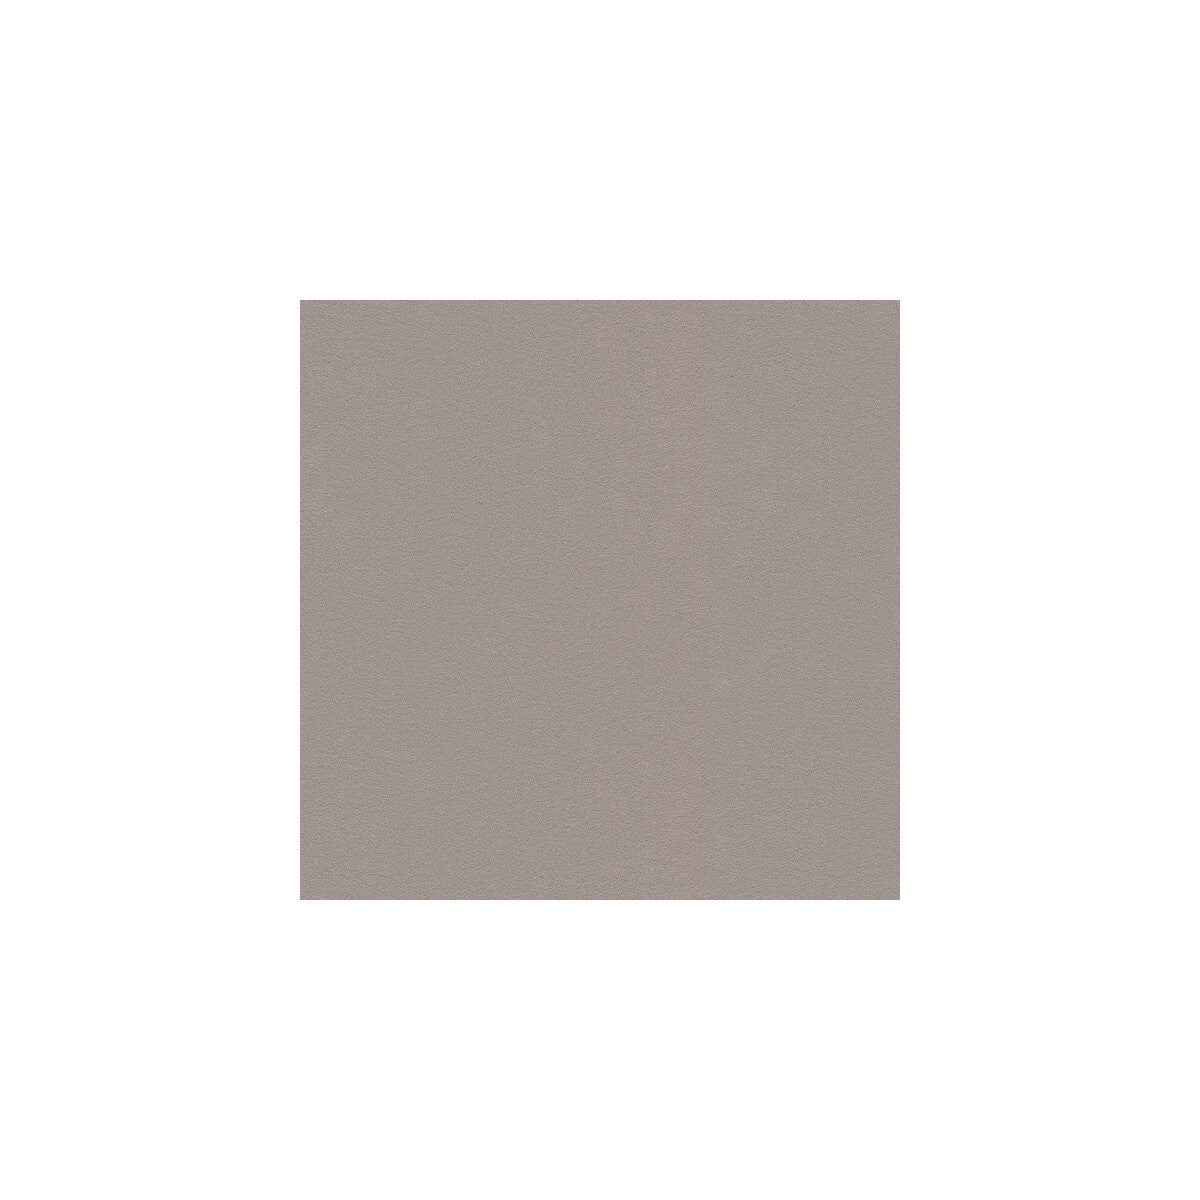 Ultrasuede fabric in taupe color - pattern ULTRASUEDE.3271TAUPE.0 - by Kravet Design in the Ultrasuede collection